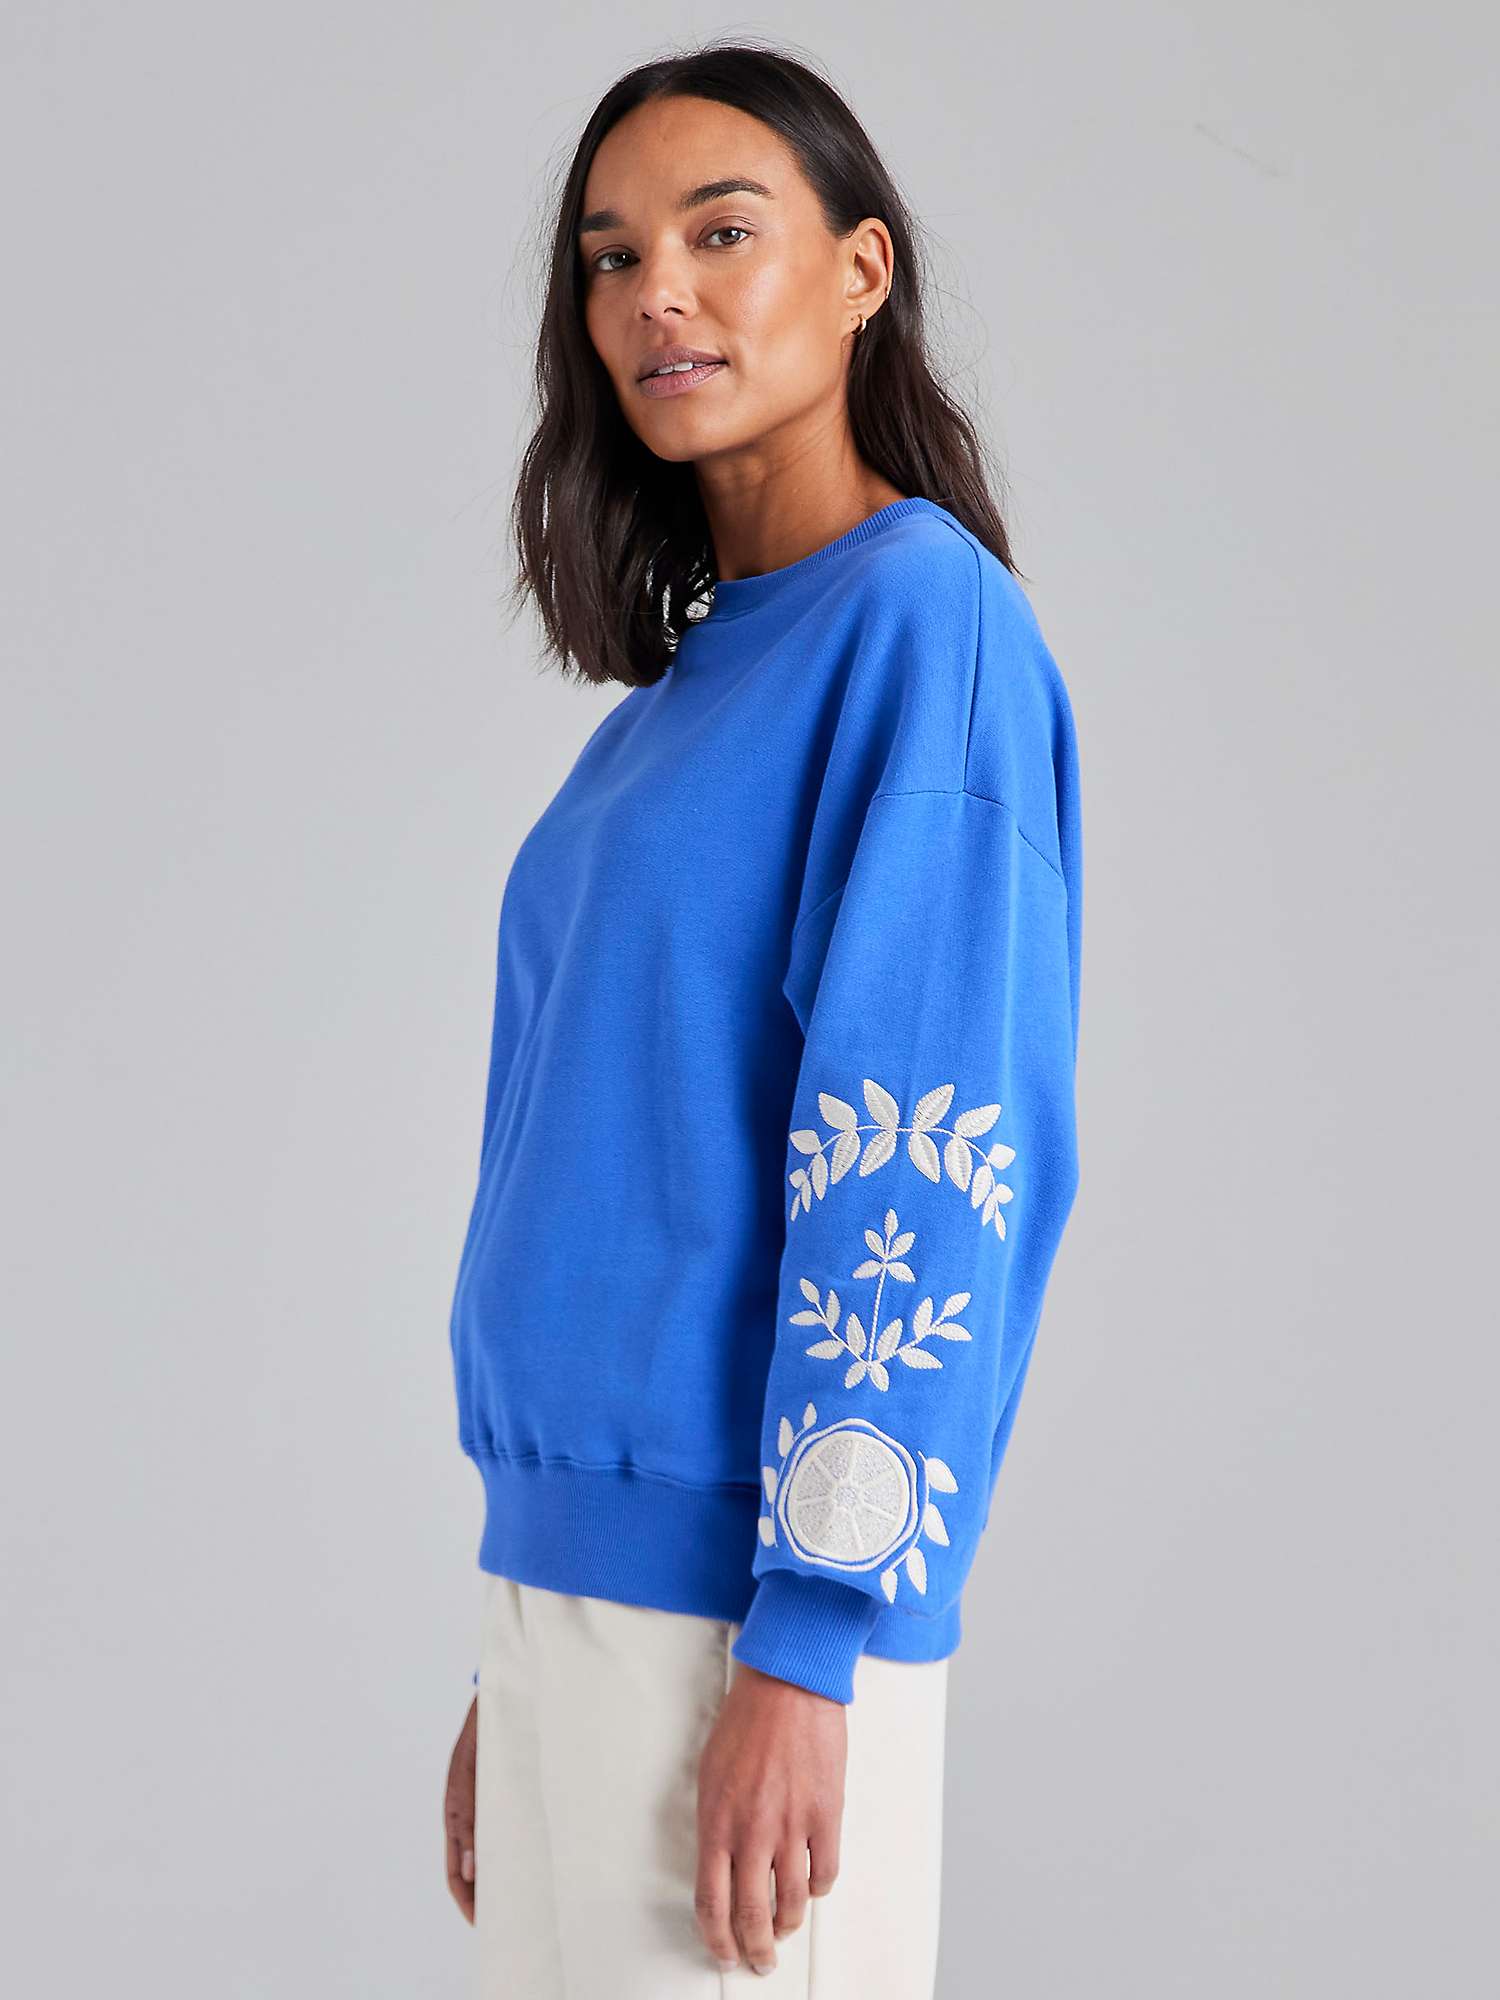 Buy Cape Cove Embroidered Sleeve Cotton Sweatshirt, Dazzling Blue Online at johnlewis.com